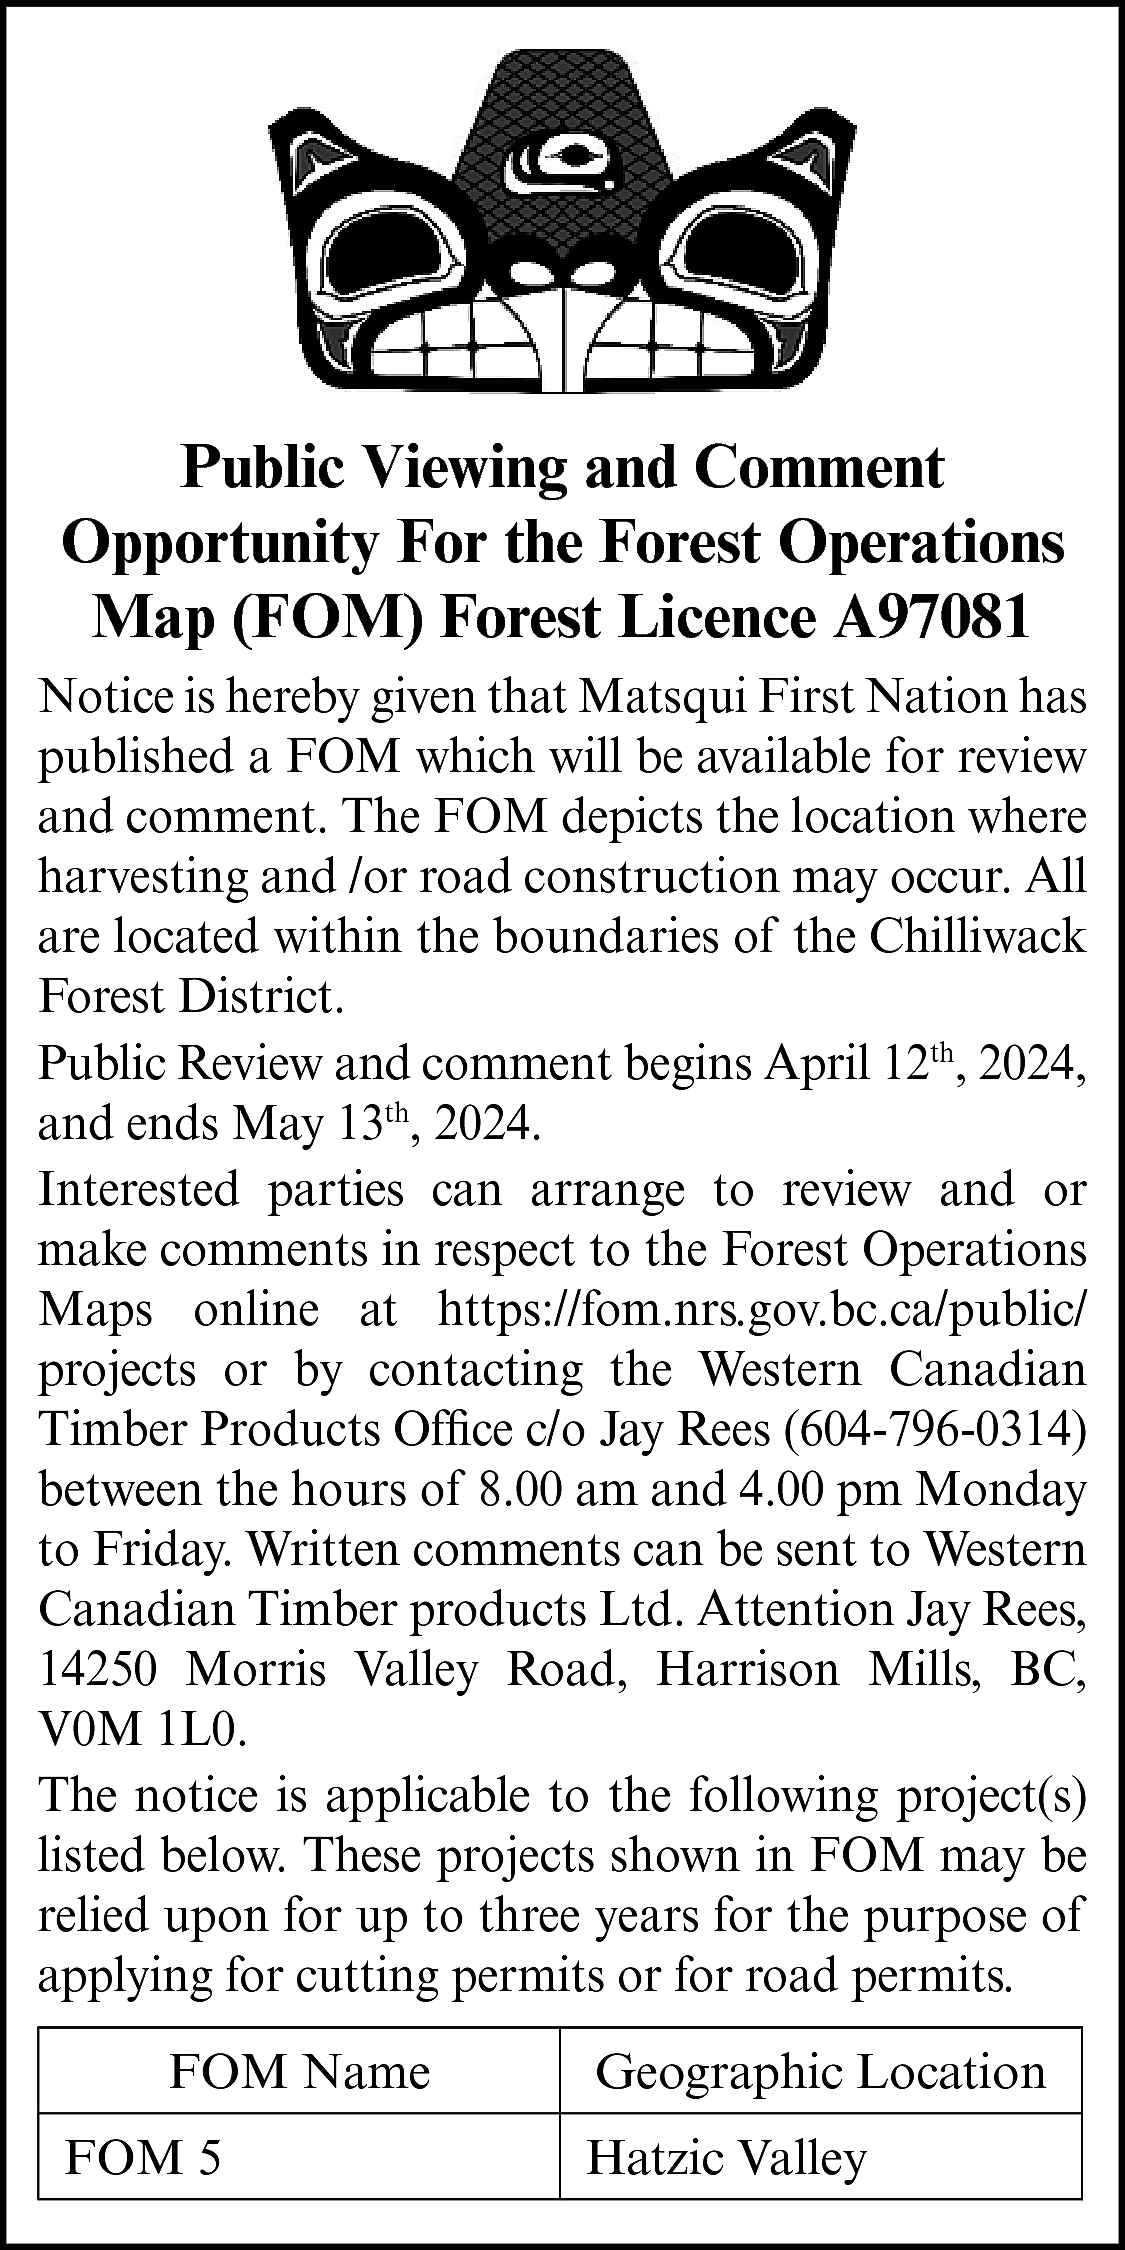 Public Viewing and Comment <br>Opportunity  Public Viewing and Comment  Opportunity For the Forest Operations  Map (FOM) Forest Licence A97081  Notice is hereby given that Matsqui First Nation has  published a FOM which will be available for review  and comment. The FOM depicts the location where  harvesting and /or road construction may occur. All  are located within the boundaries of the Chilliwack  Forest District.  Public Review and comment begins April 12th, 2024,  and ends May 13th, 2024.  Interested parties can arrange to review and or  make comments in respect to the Forest Operations  Maps online at https://fom.nrs.gov.bc.ca/public/  projects or by contacting the Western Canadian  Timber Products Office c/o Jay Rees (604-796-0314)  between the hours of 8.00 am and 4.00 pm Monday  to Friday. Written comments can be sent to Western  Canadian Timber products Ltd. Attention Jay Rees,  14250 Morris Valley Road, Harrison Mills, BC,  V0M 1L0.  The notice is applicable to the following project(s)  listed below. These projects shown in FOM may be  relied upon for up to three years for the purpose of  applying for cutting permits or for road permits.  FOM Name  FOM 5    Geographic Location  Hatzic Valley    